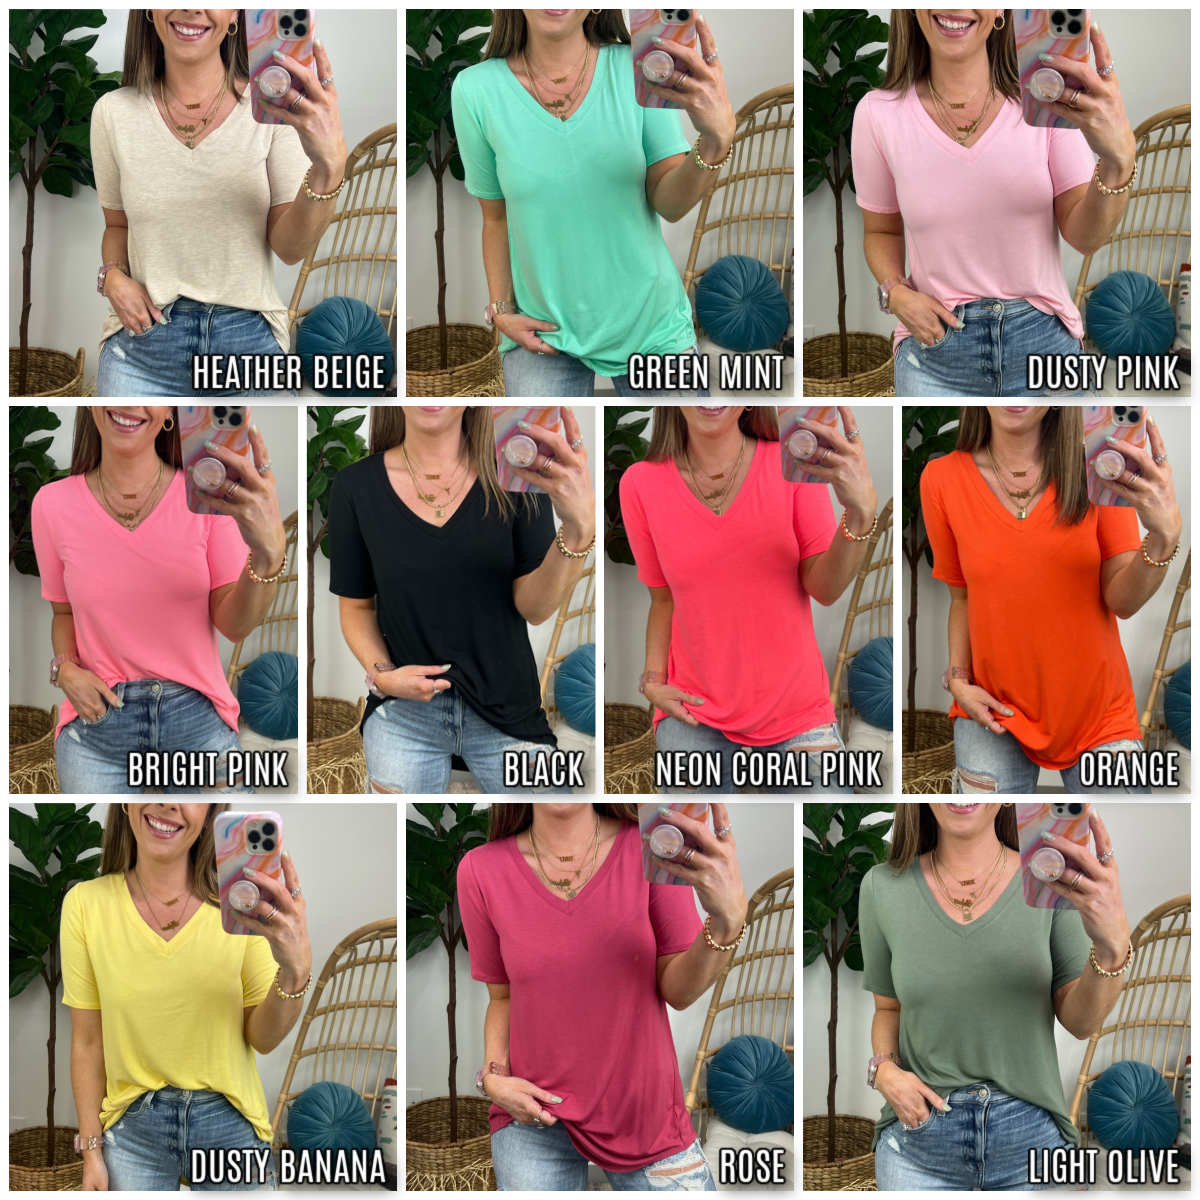  Ameera V-neck Short Sleeve Top - Madison and Mallory